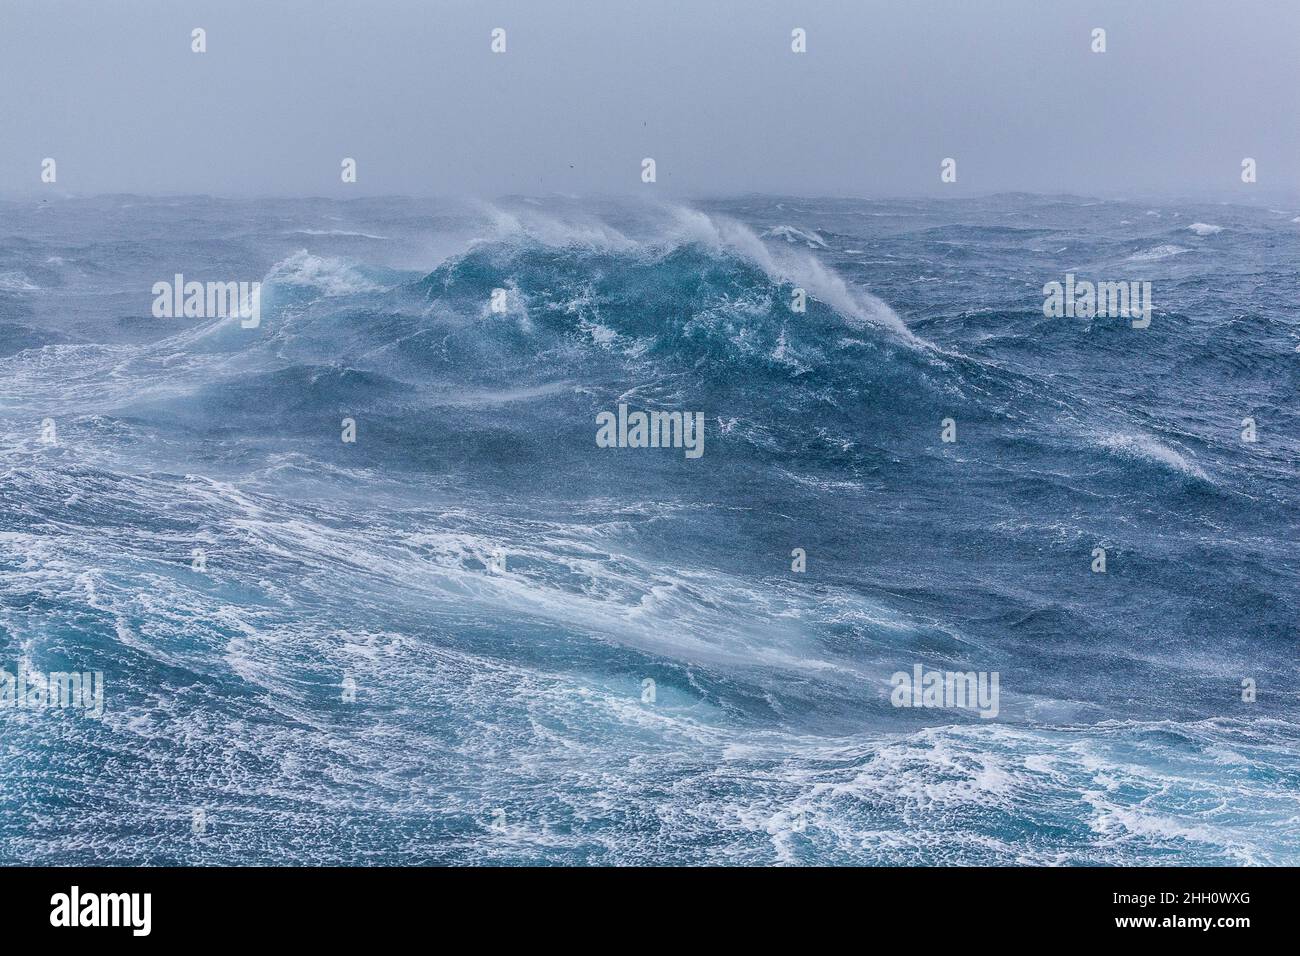 Wild seas in the Southern Ocean, south of Macquarie Island. Stock Photo